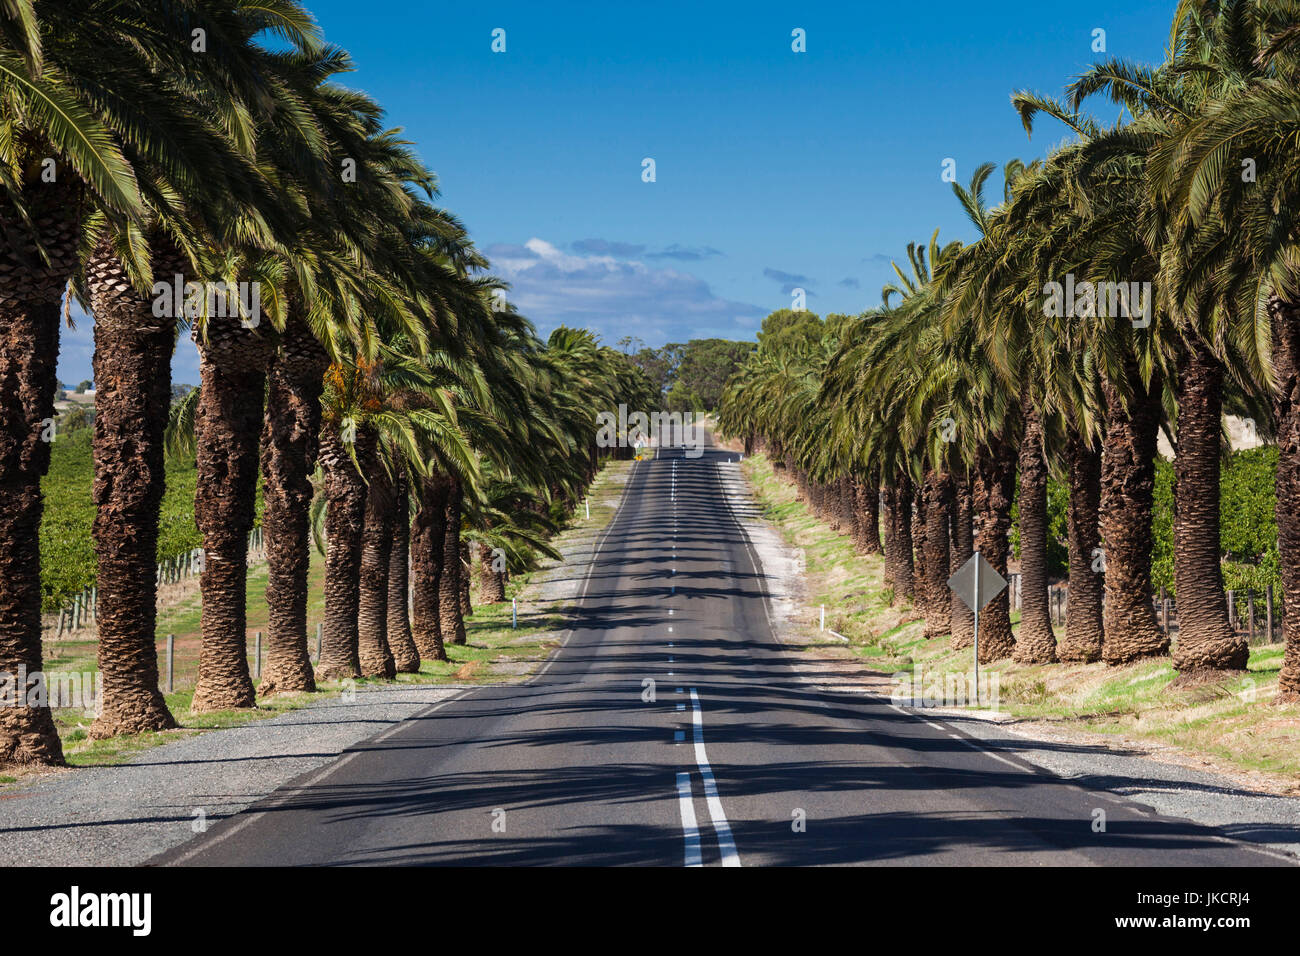 Australia, South Australia, Barossa Valley, Seppeltsfield, country road with palm trees Stock Photo